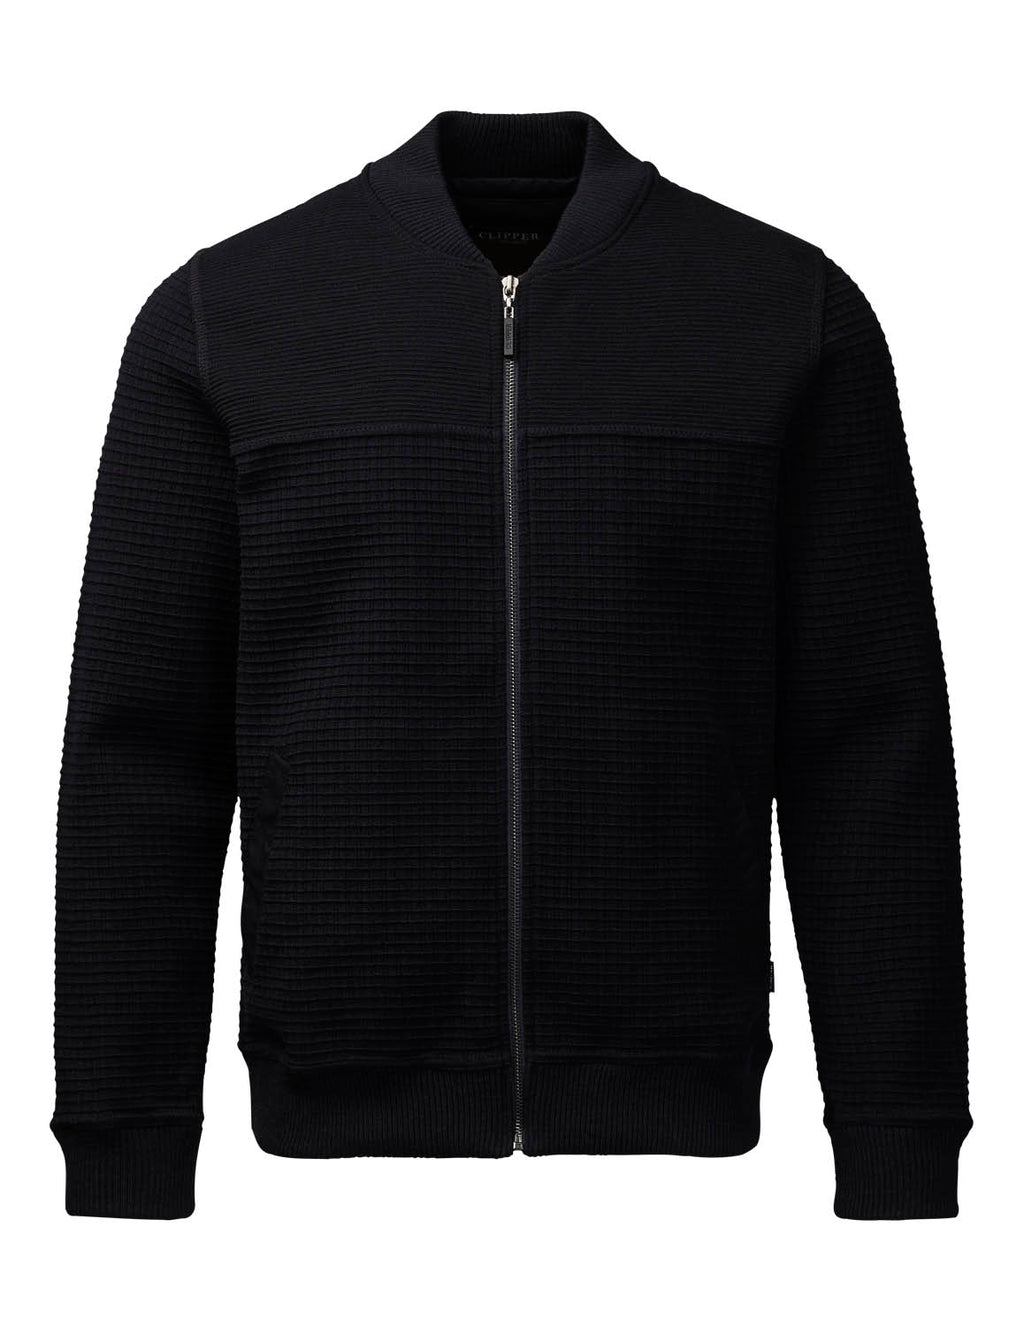 Clipper - Dundee Cardigan Bomber